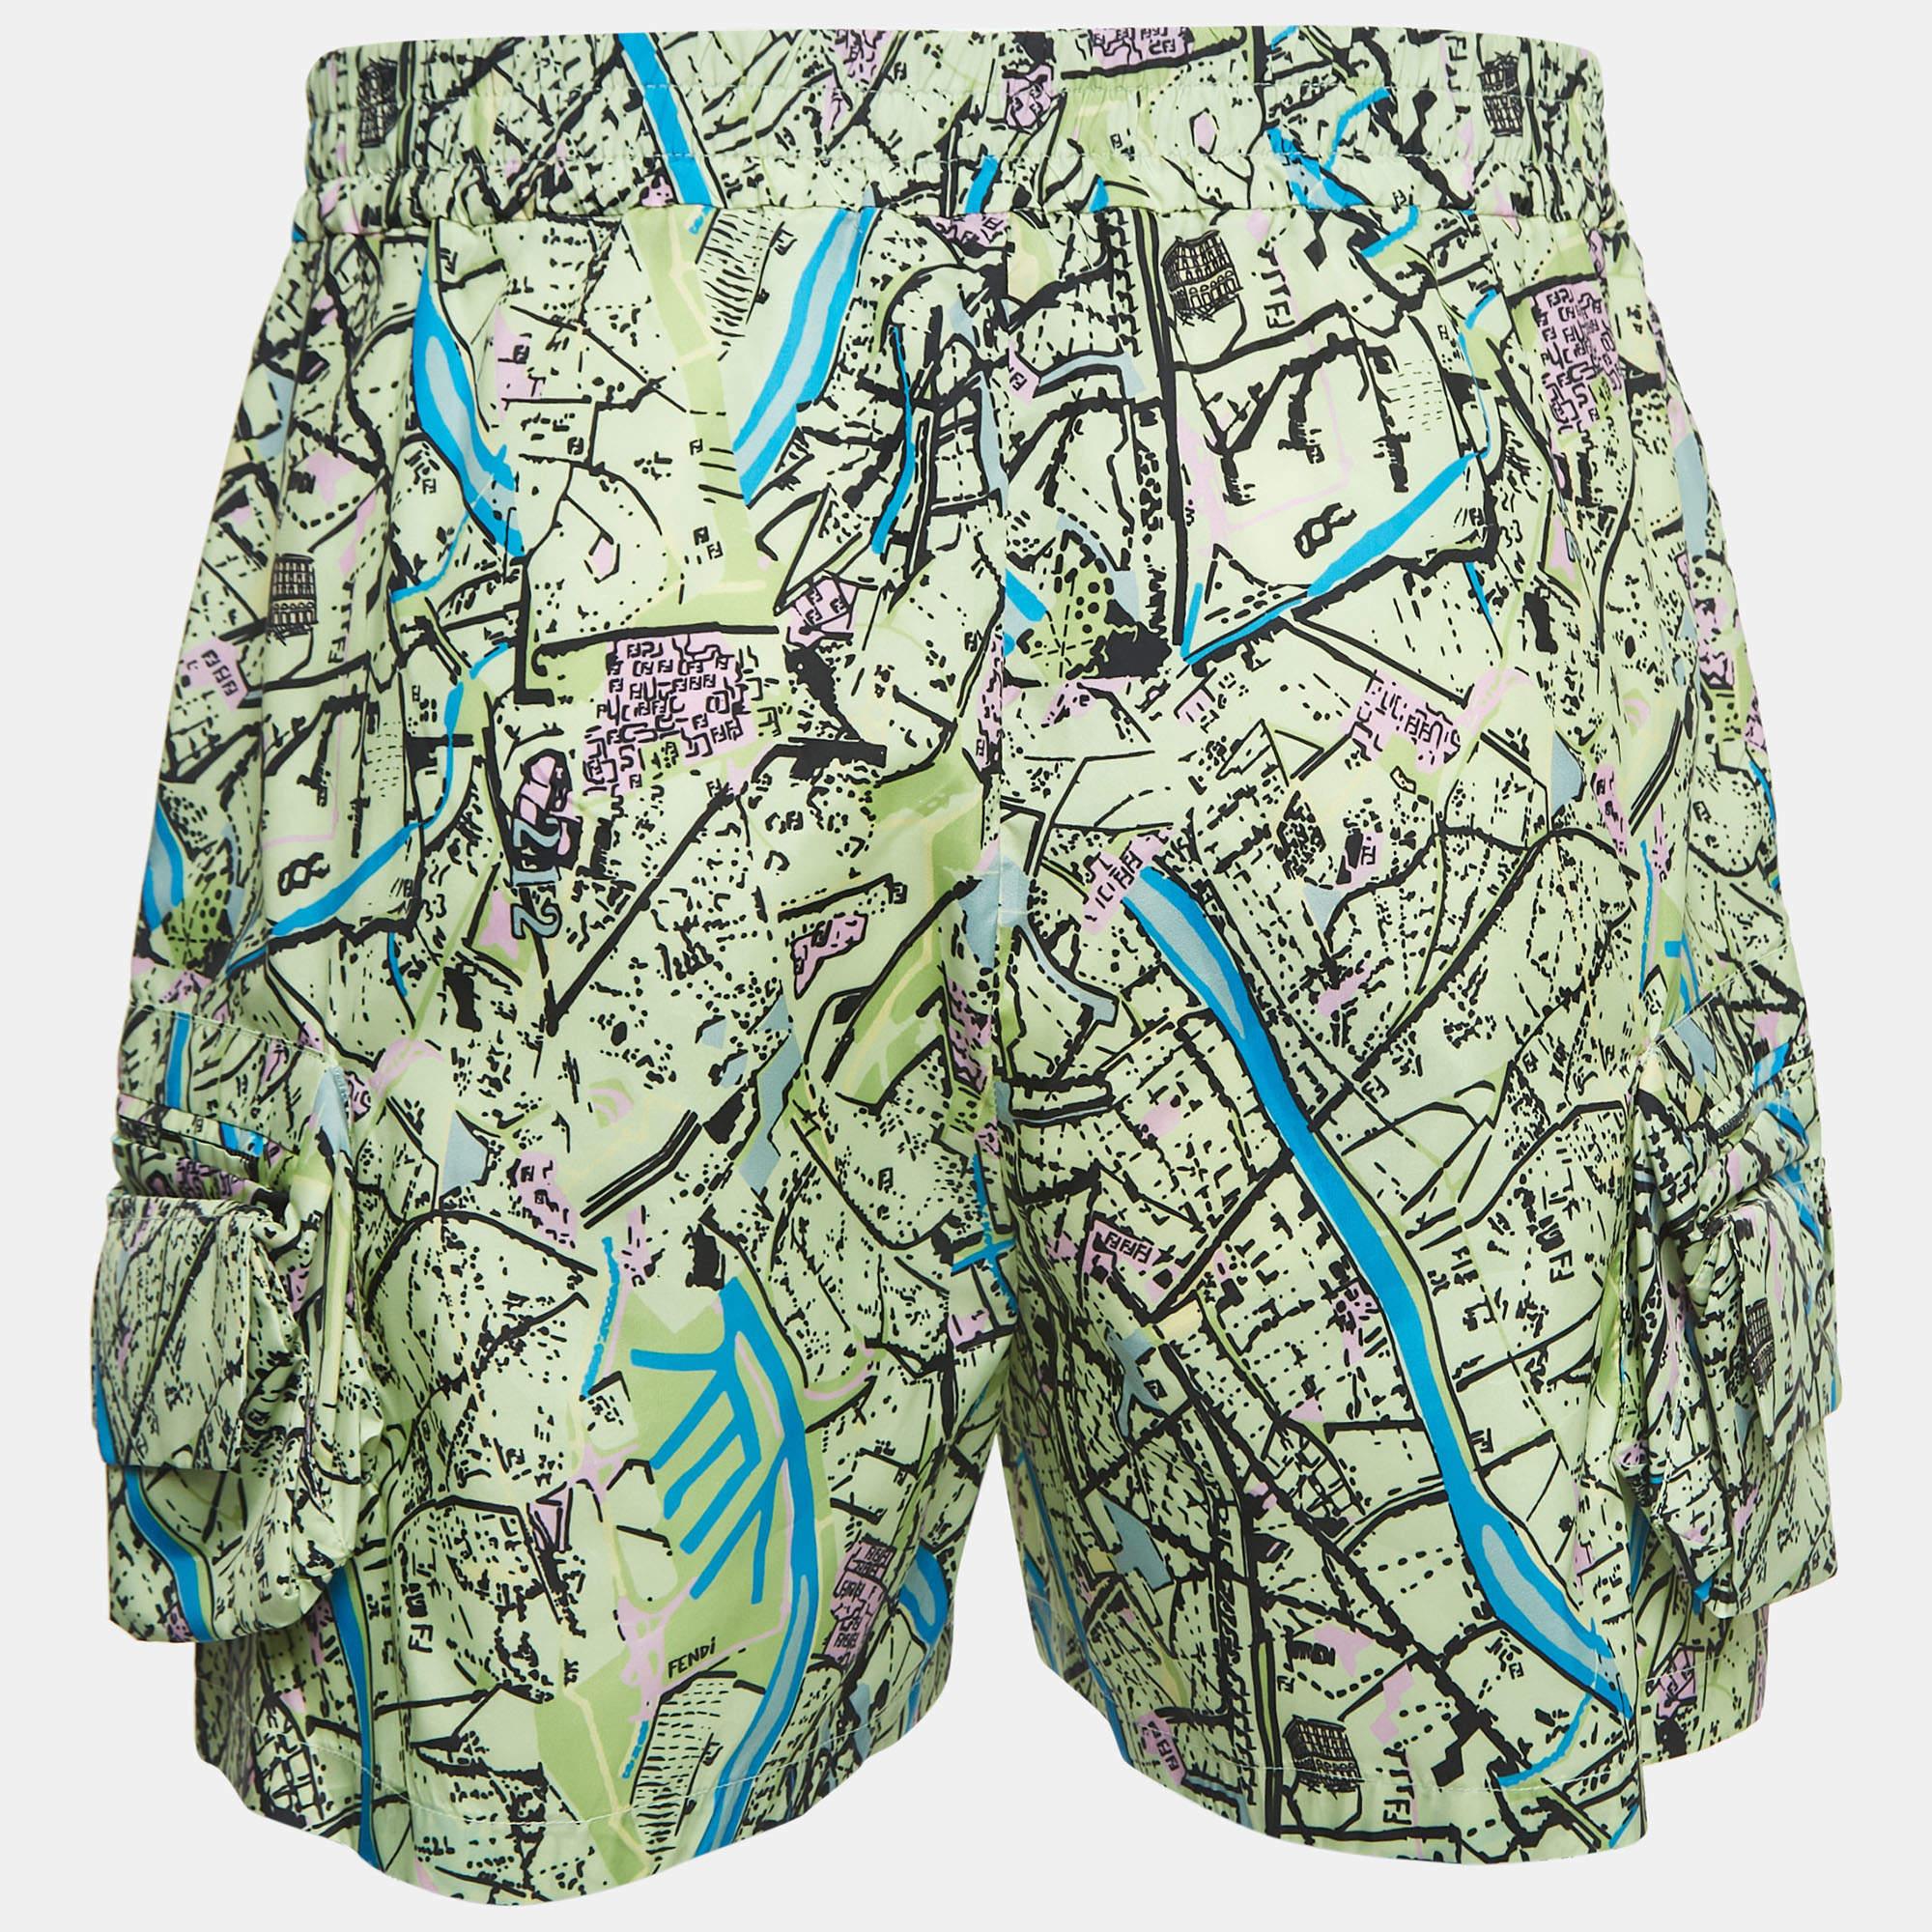 Beachy vacations call for a stylish pair of shorts like this. Stitched using high-quality fabric, this pair of shorts is styled with classic details and has a superb length. Wear it with T-shirts.

Includes: Brand Tag